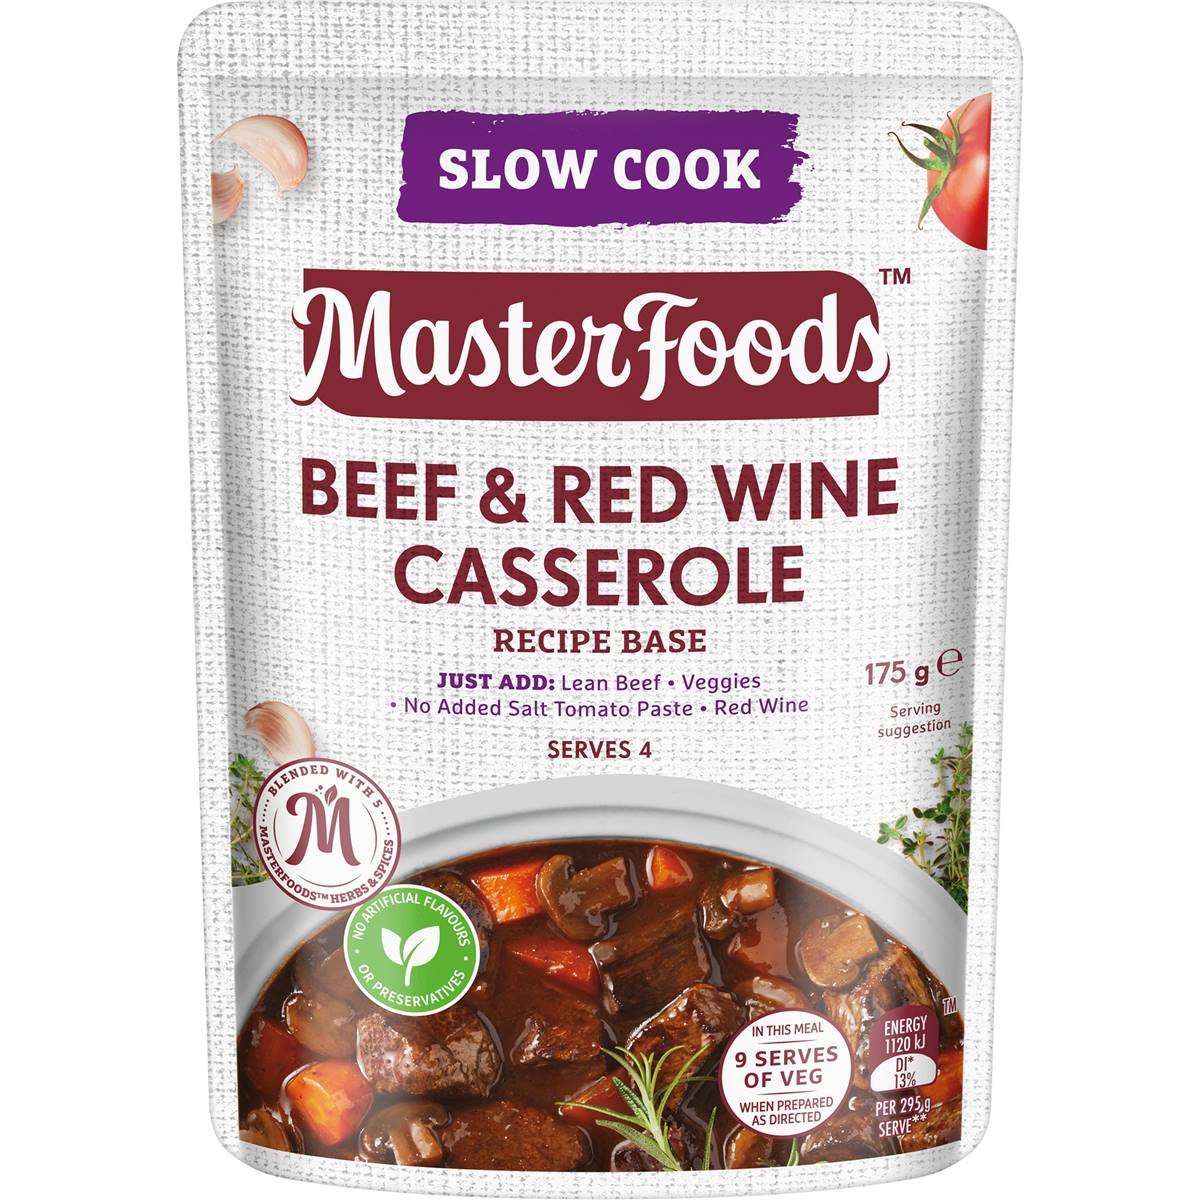 Masterfoods Slow Cooker Beef & Red Wine Casserole